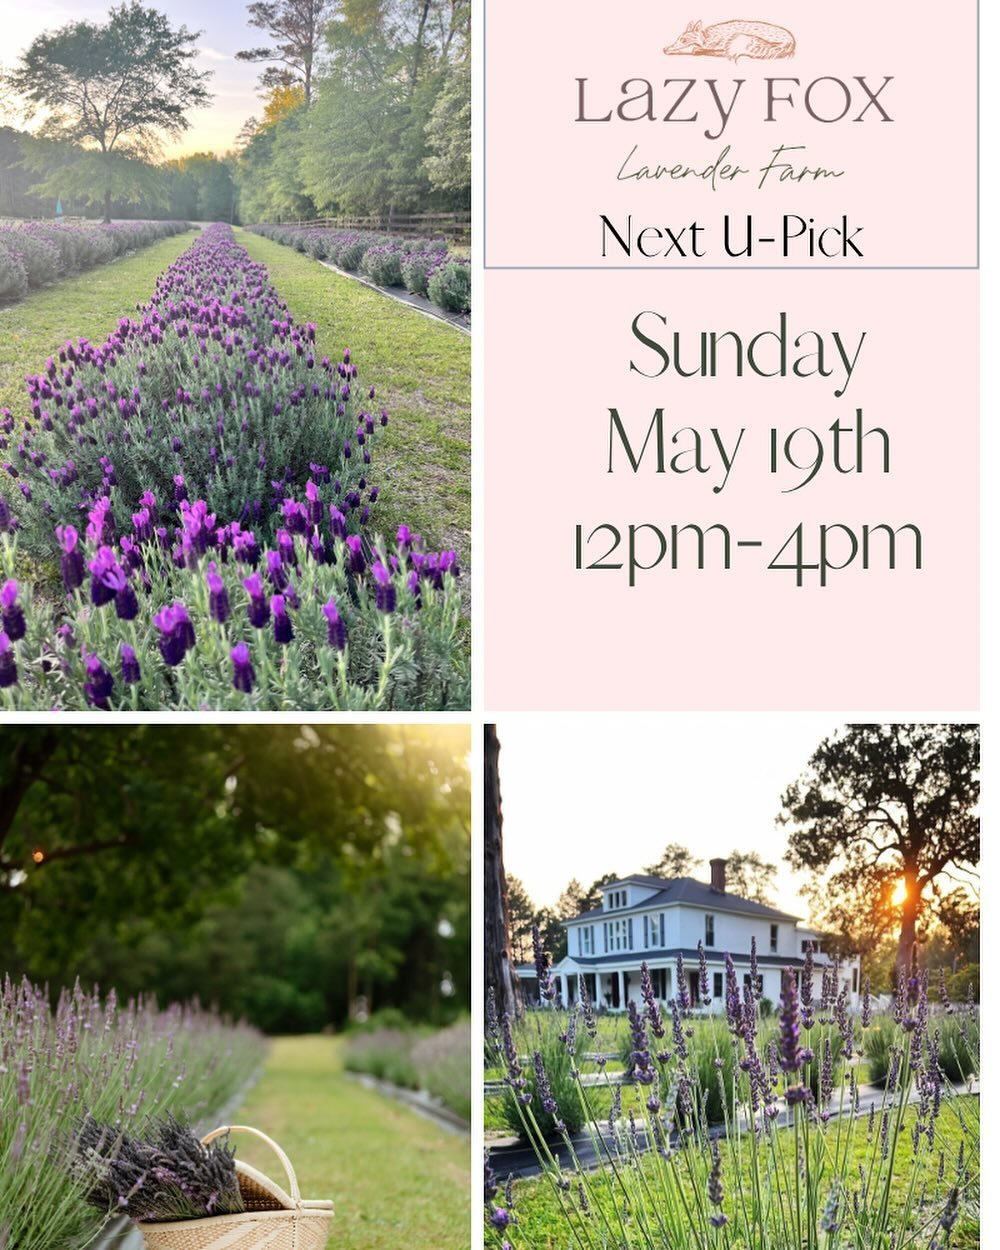 Next U-Pick
May 19th from 12-4pm
Click link in bio to book or at www.lazyfoxlavenderfarm.com

With the entrance ticket you can:
1. Enter the farm
2. Pick a bouquet of fresh lavender 
3. Shop in our Parlor Store
4. Bring a picnic lunch
5. Purchase ice